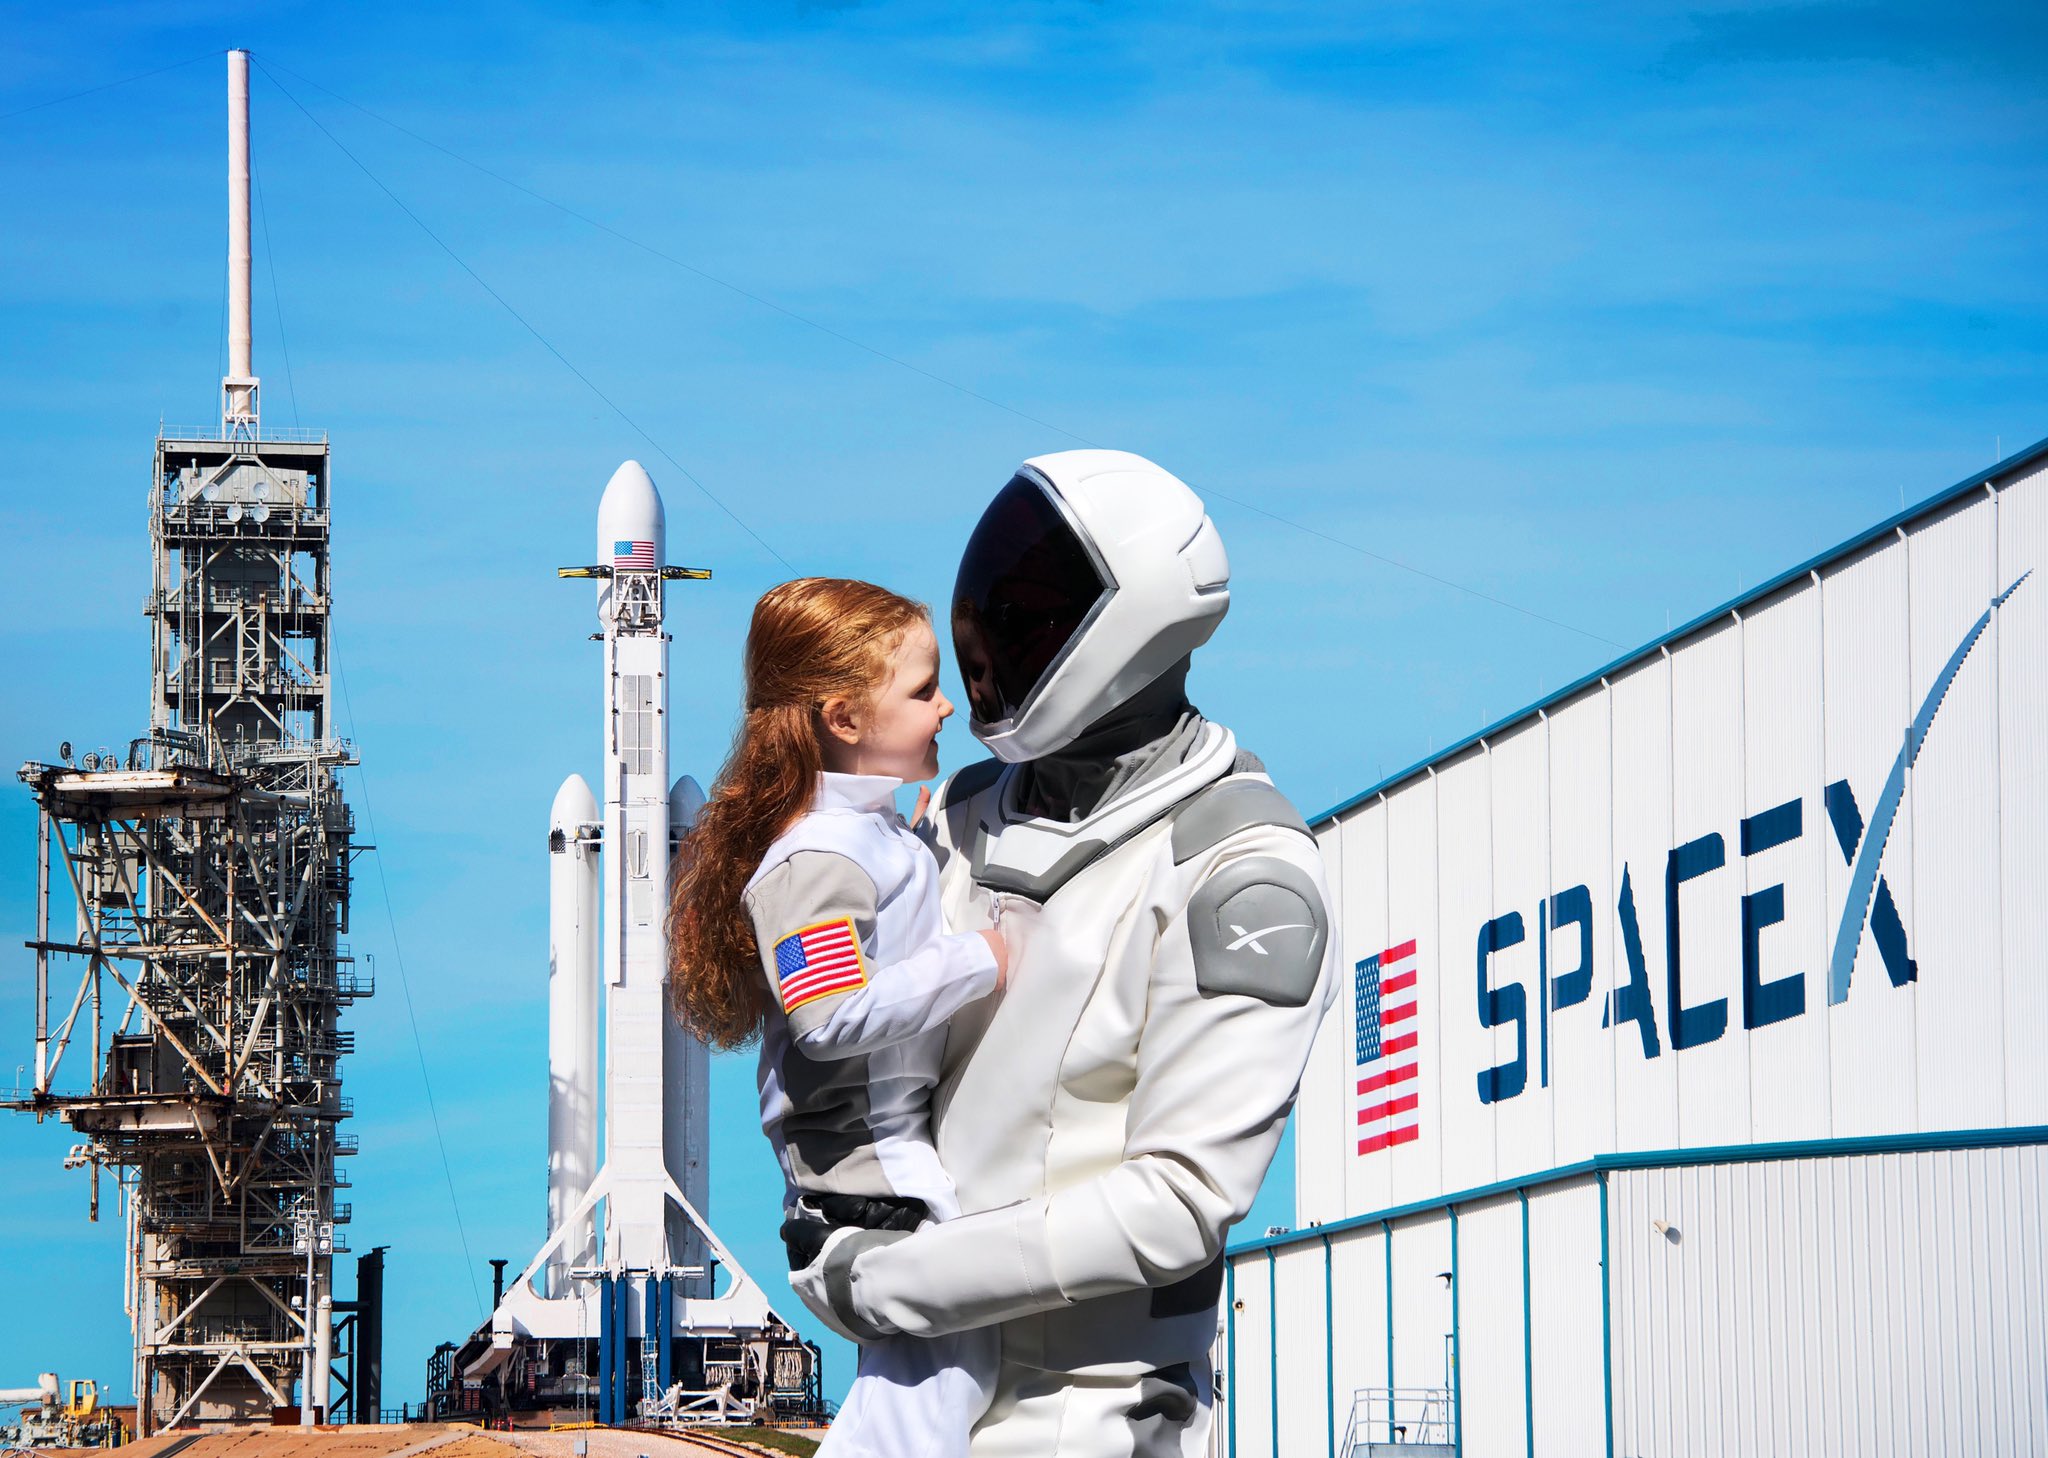 spacex, technology, rocket, spacesuit